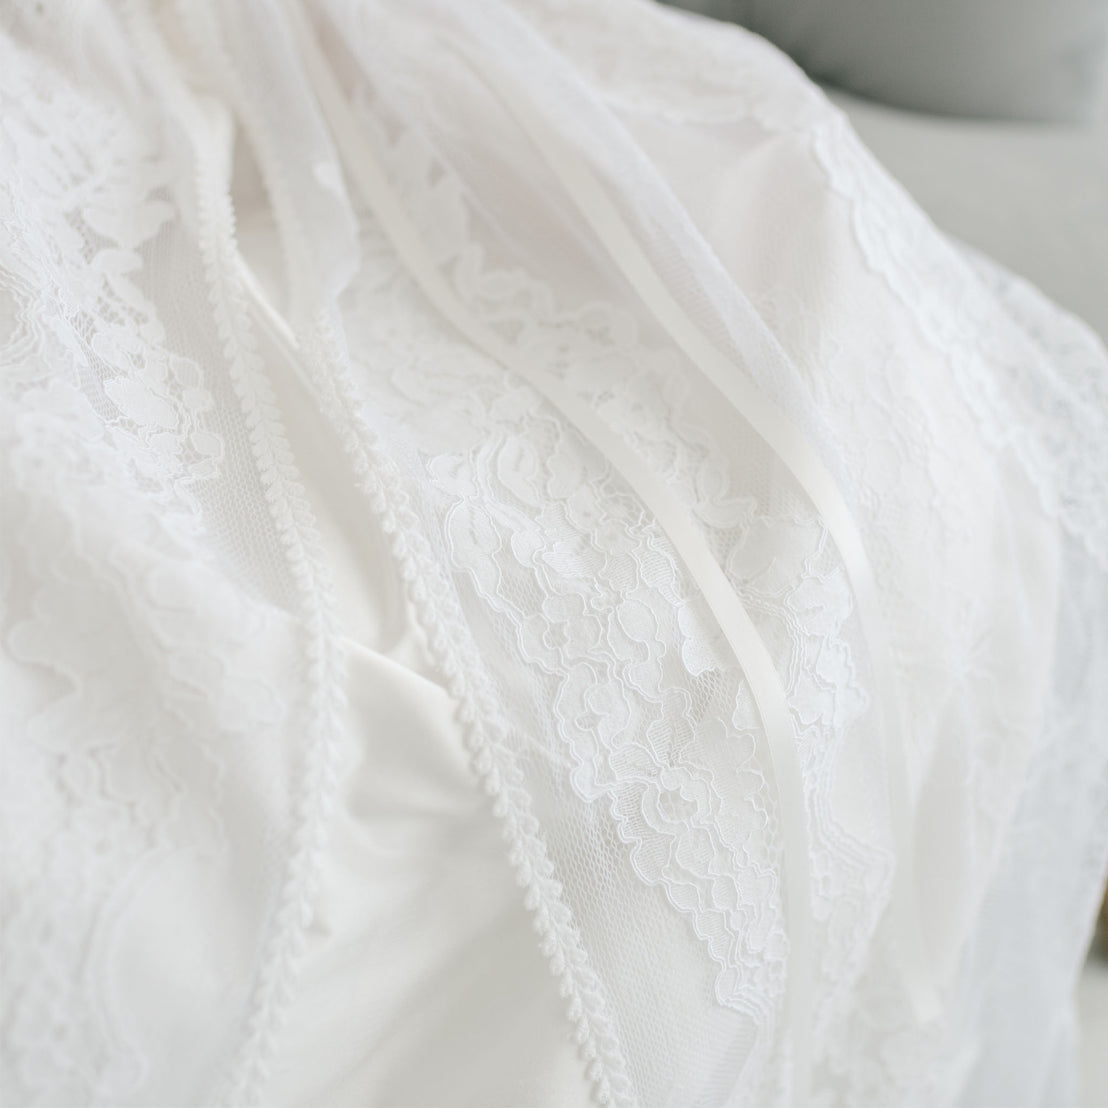 Close-up of delicate white lace and sheer fabric, part of the elegant Aria Christening Gown & Bonnet, showing intricate floral designs and smooth textures against a light background.